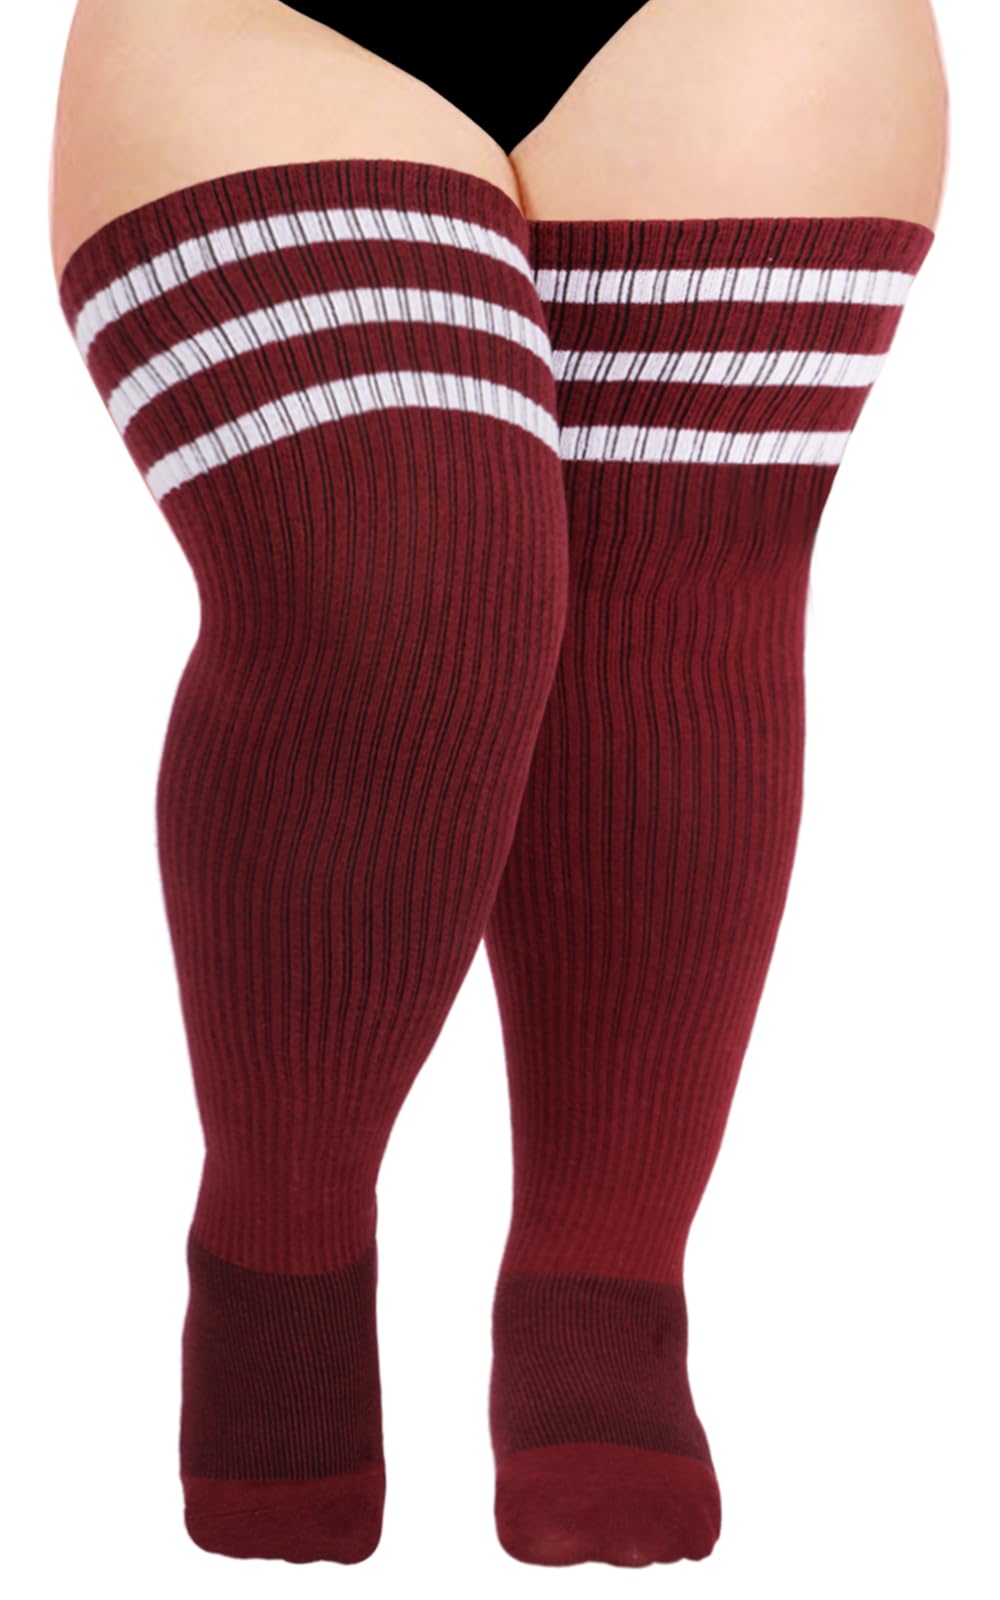 Womens Knit Cotton Extra Long Over the Knee High Socks-Burgundy - Moon Wood